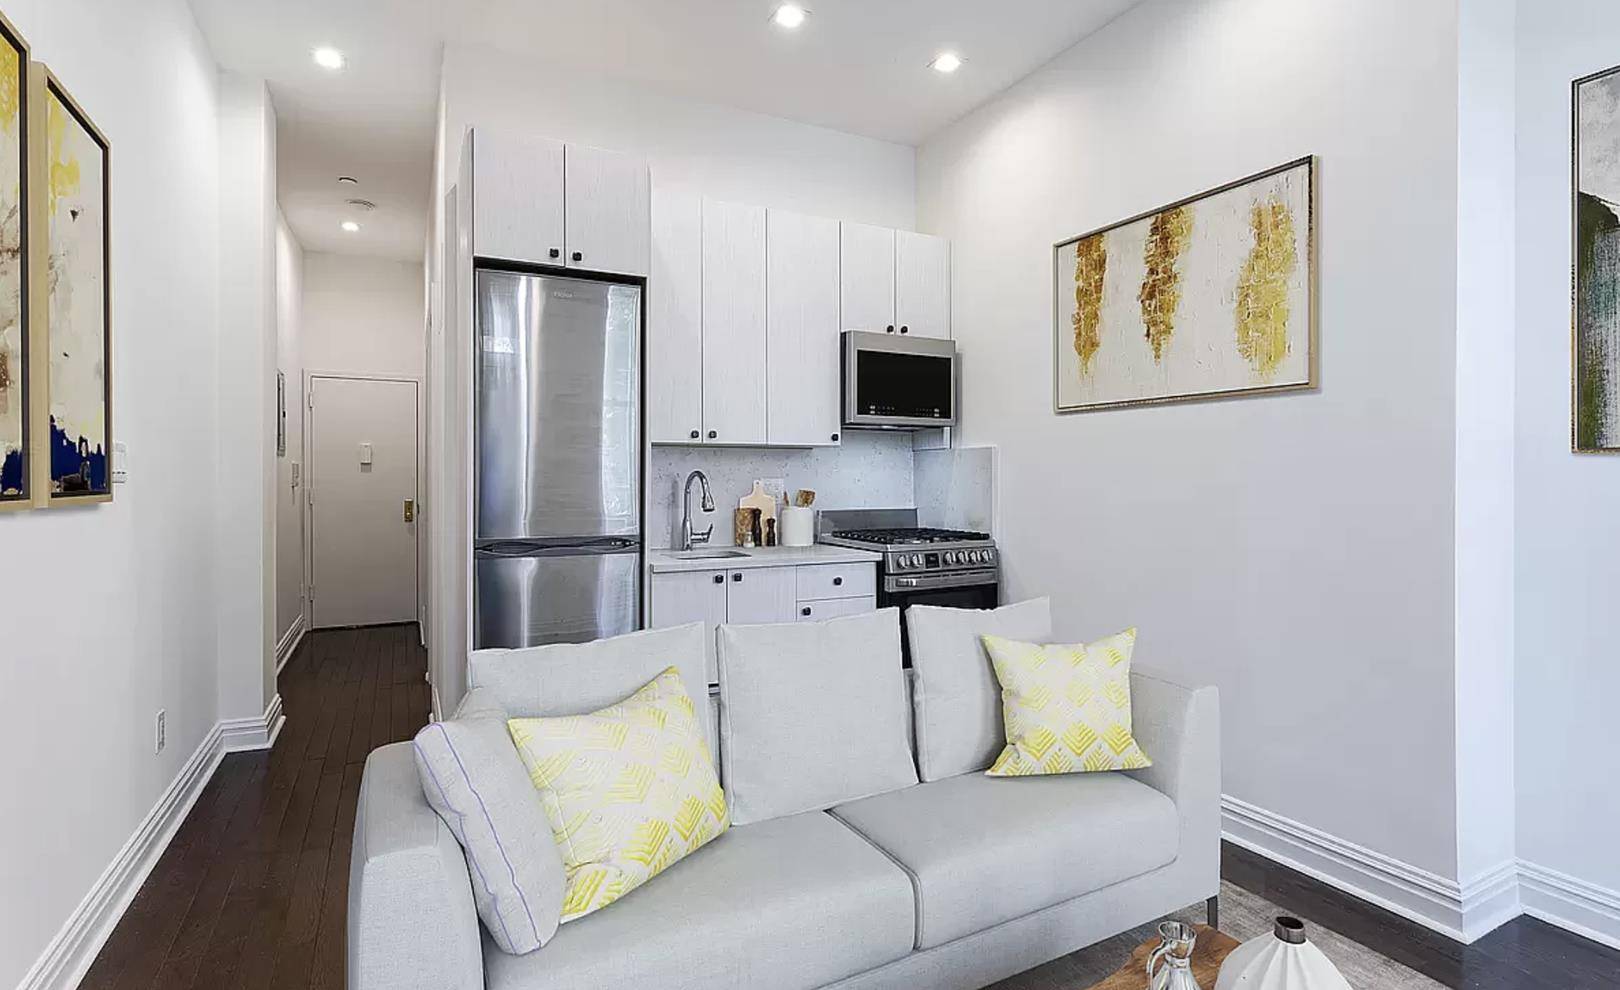 This beautiful 1 bedroom is located in prime East Village on the iconic St Mark s Place.